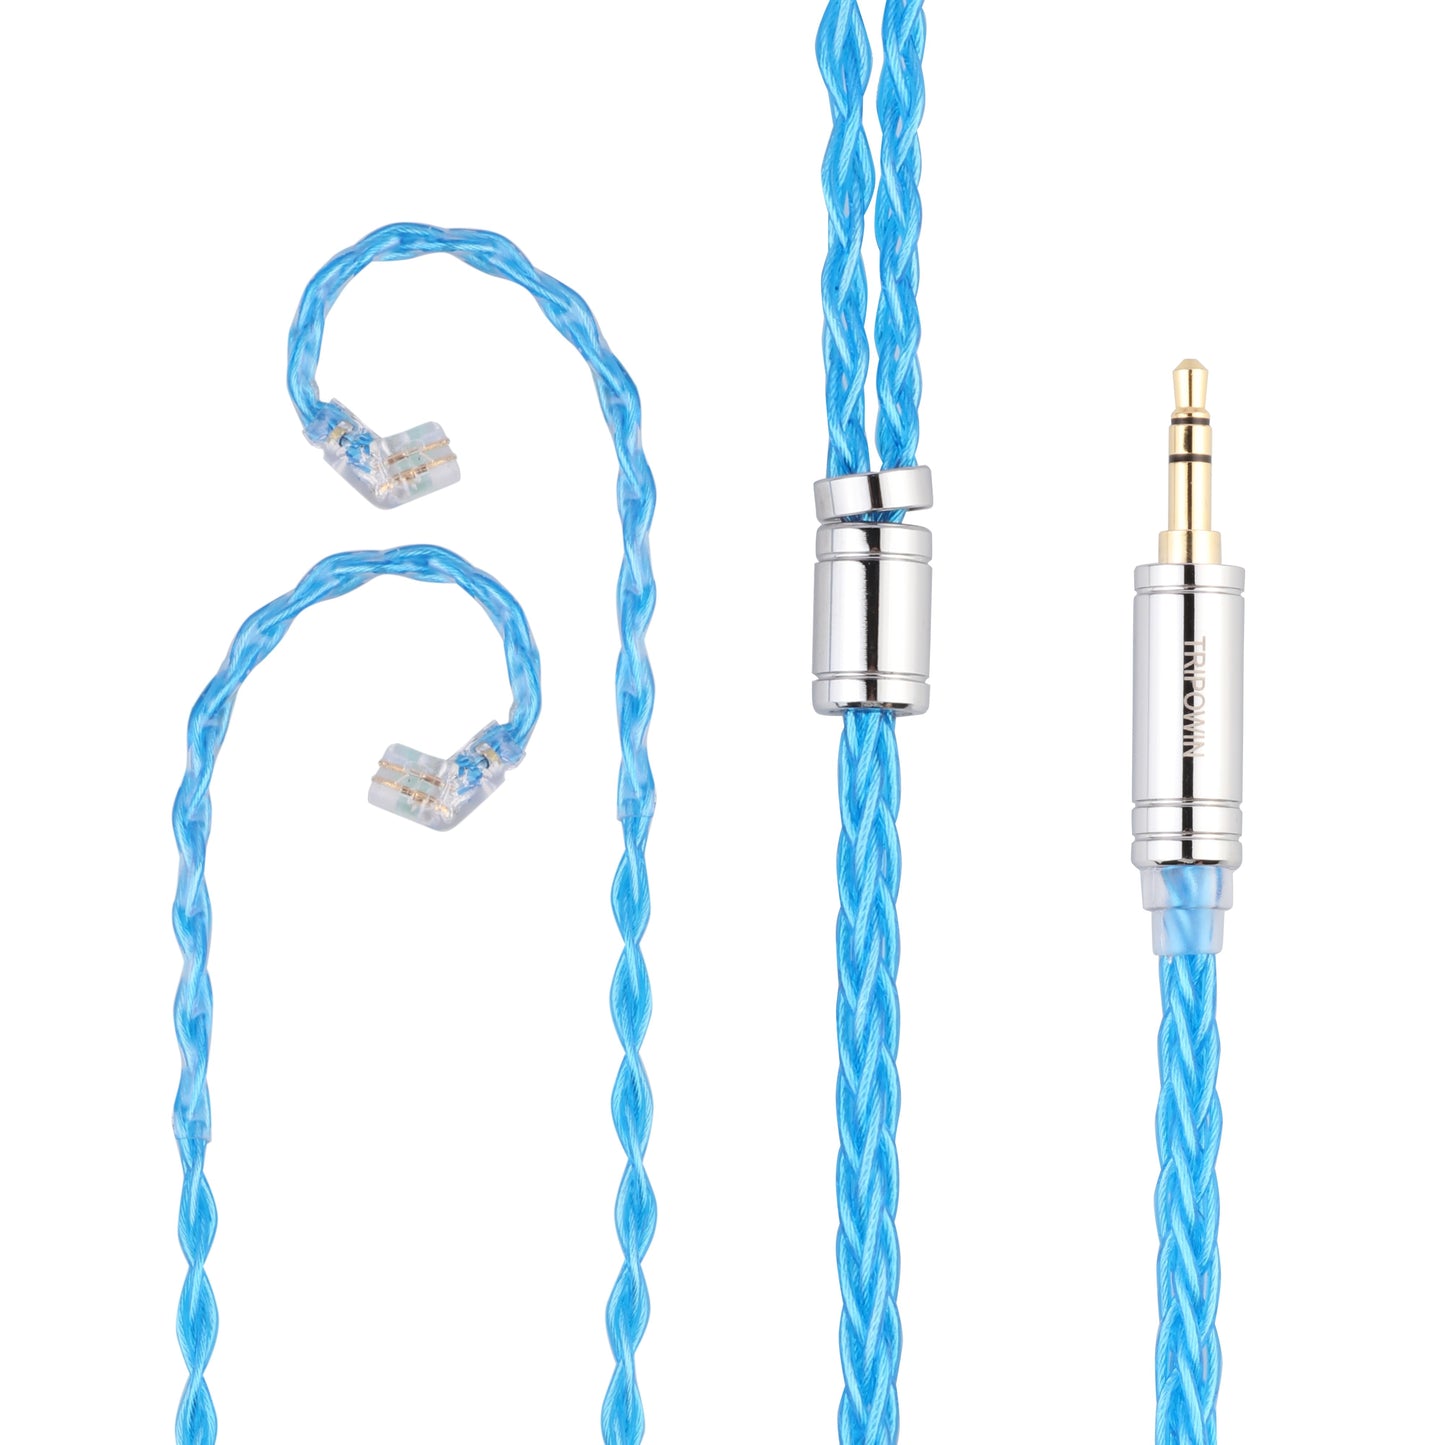 Tripowin Seraph 8 Cores IEM Cable Replacement Earphone Cable